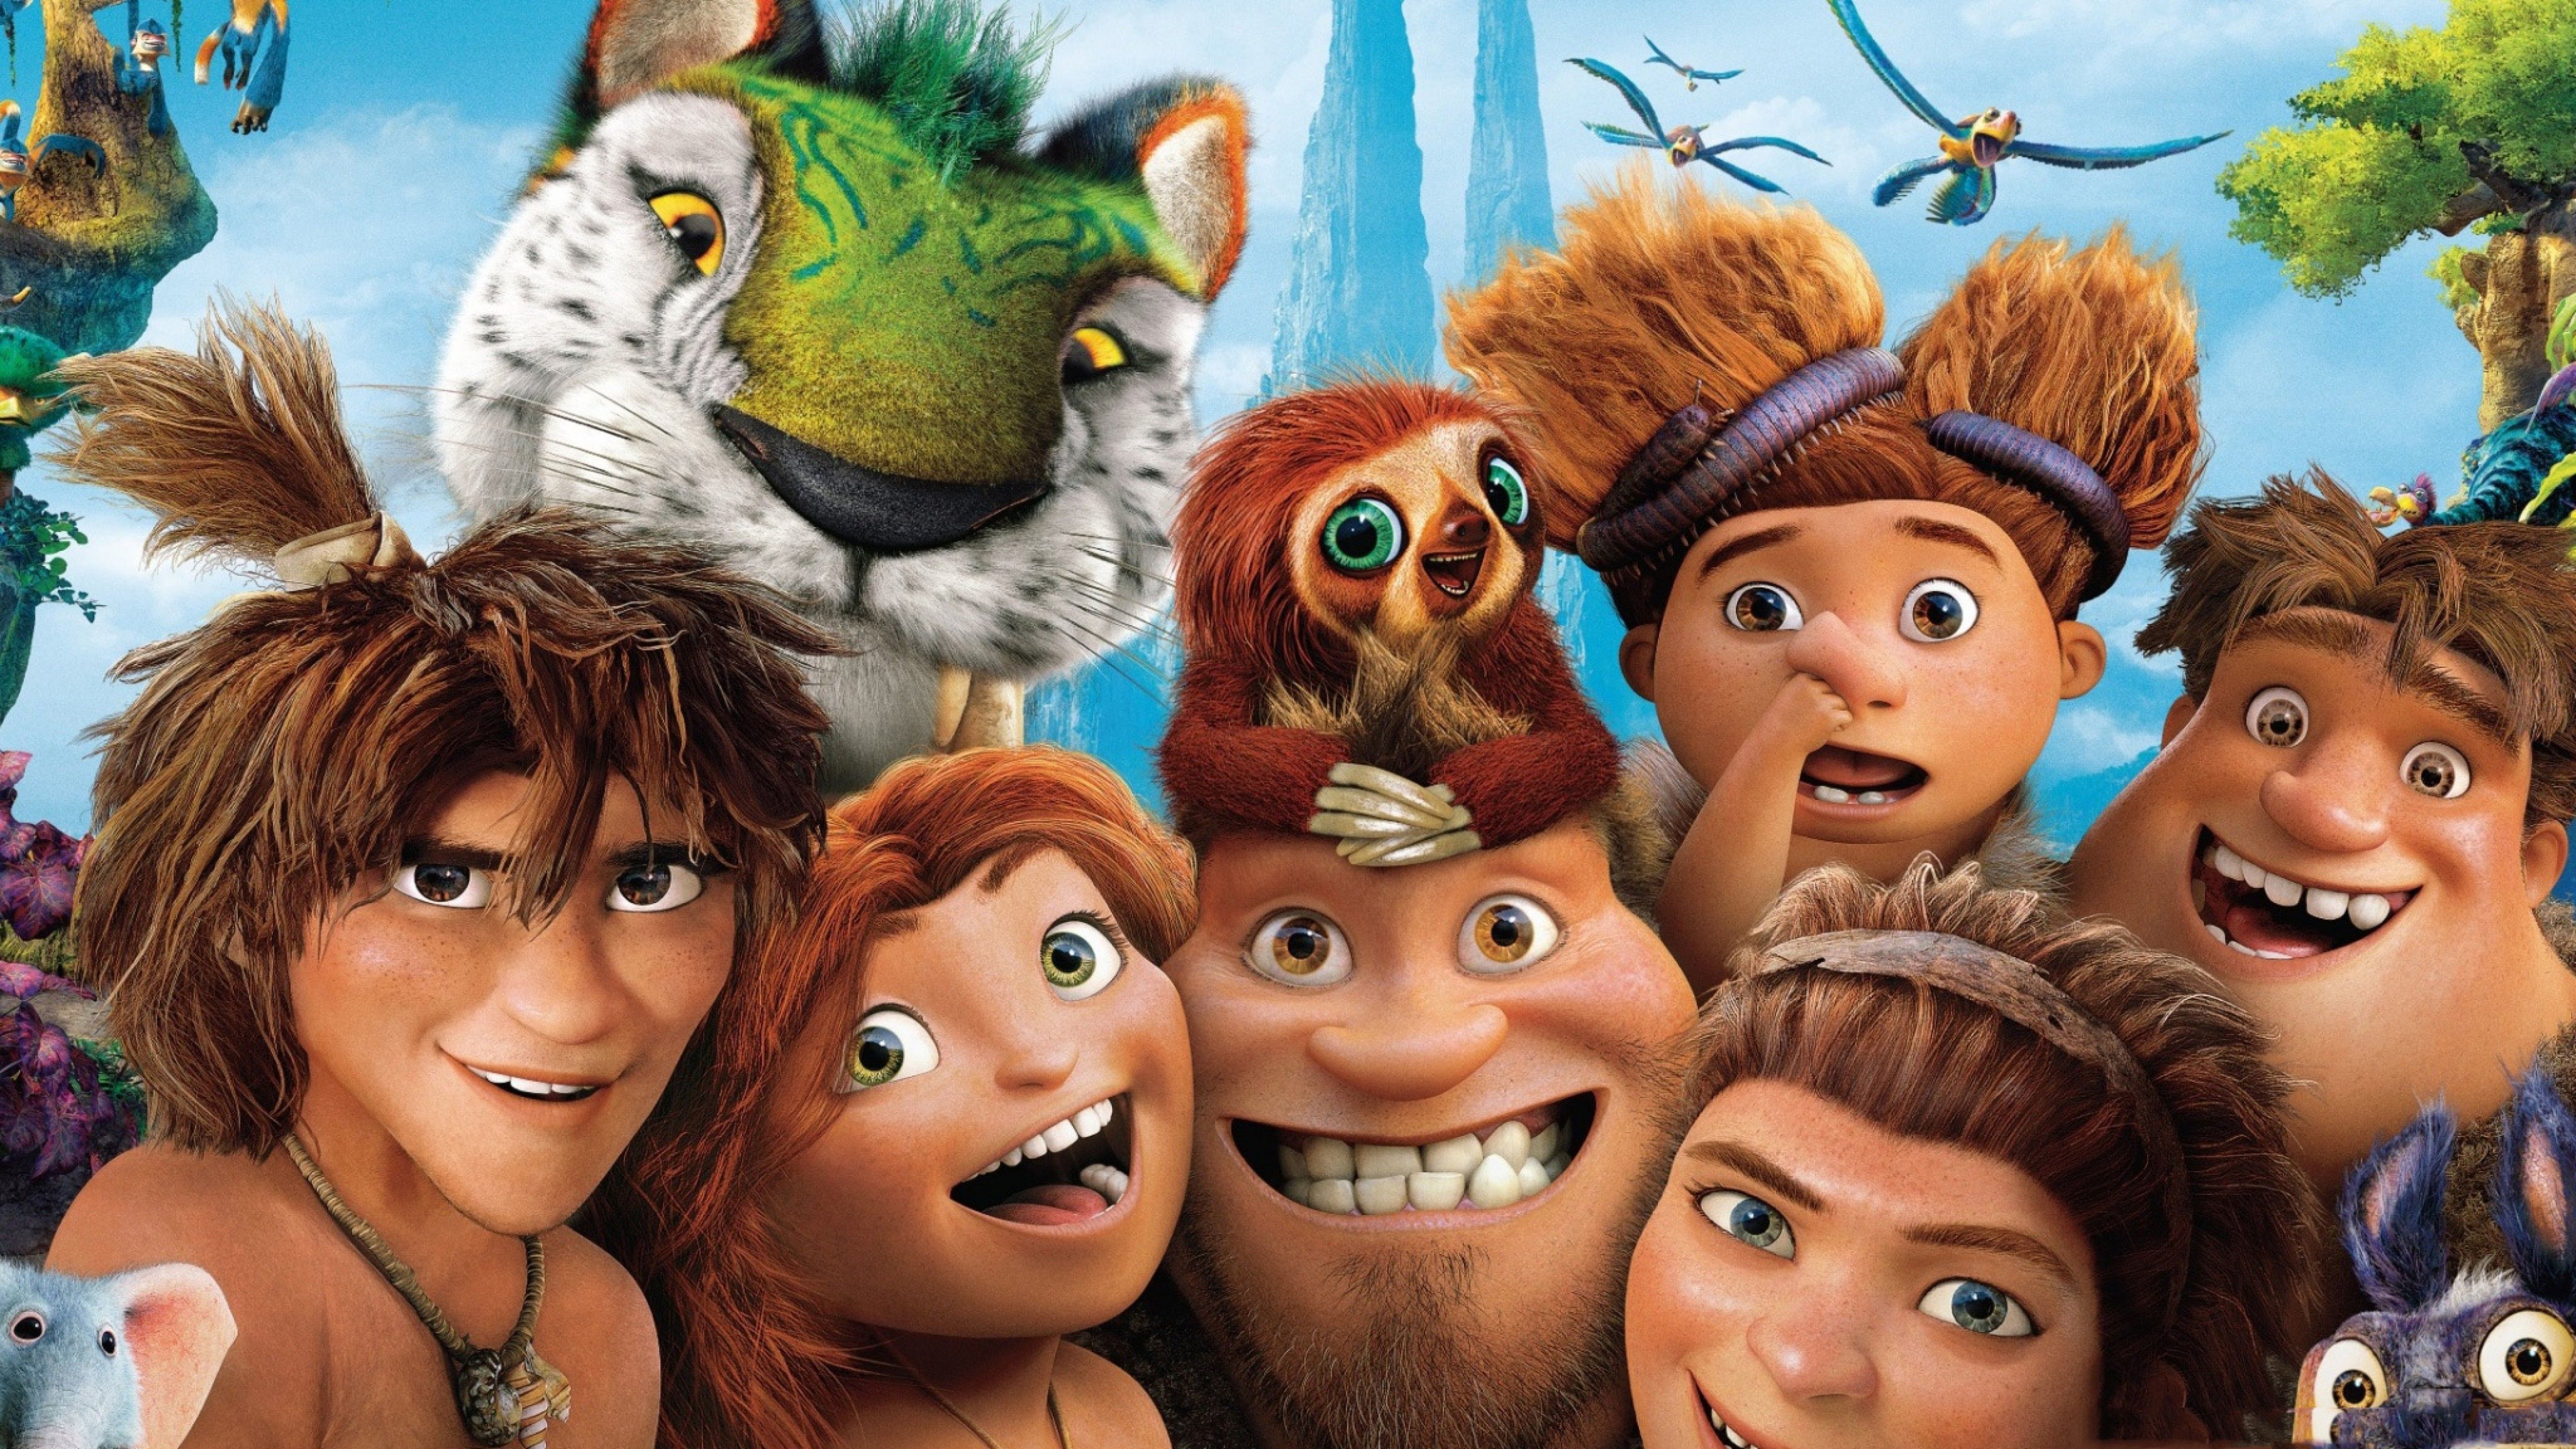 Wallpaper The Croods 5k, best animation movies, Movies